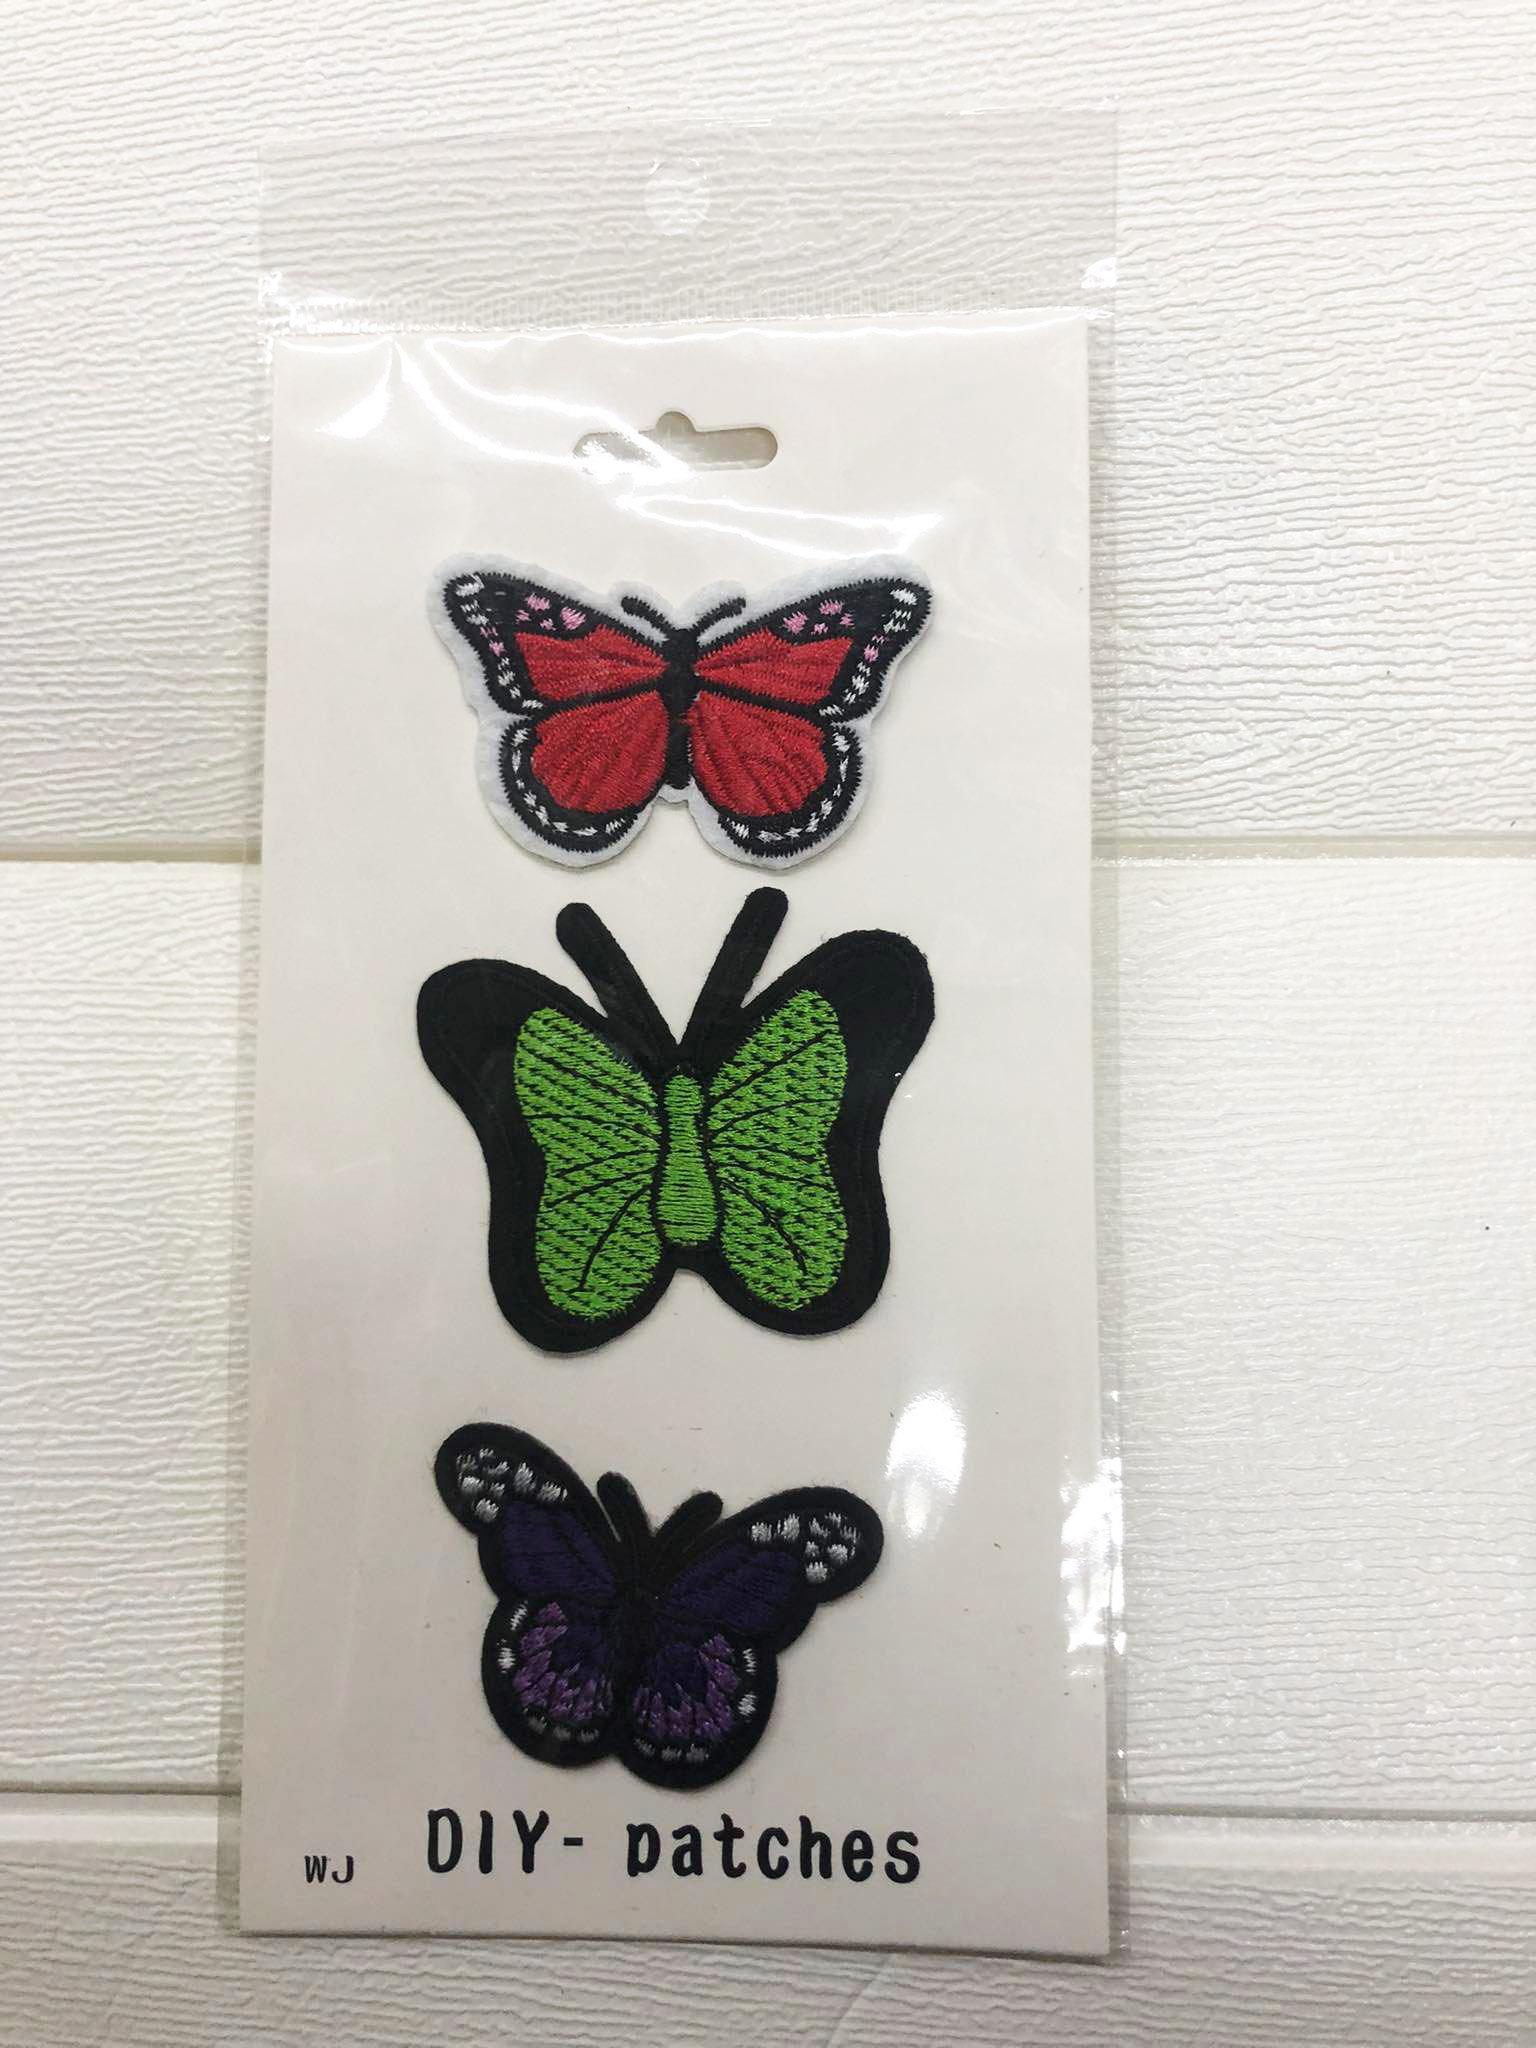 BETTERFORM Individuality Butterfly Flowers DIY Embroidery Patches Clothes  Stickers Appliques Clothing Badges